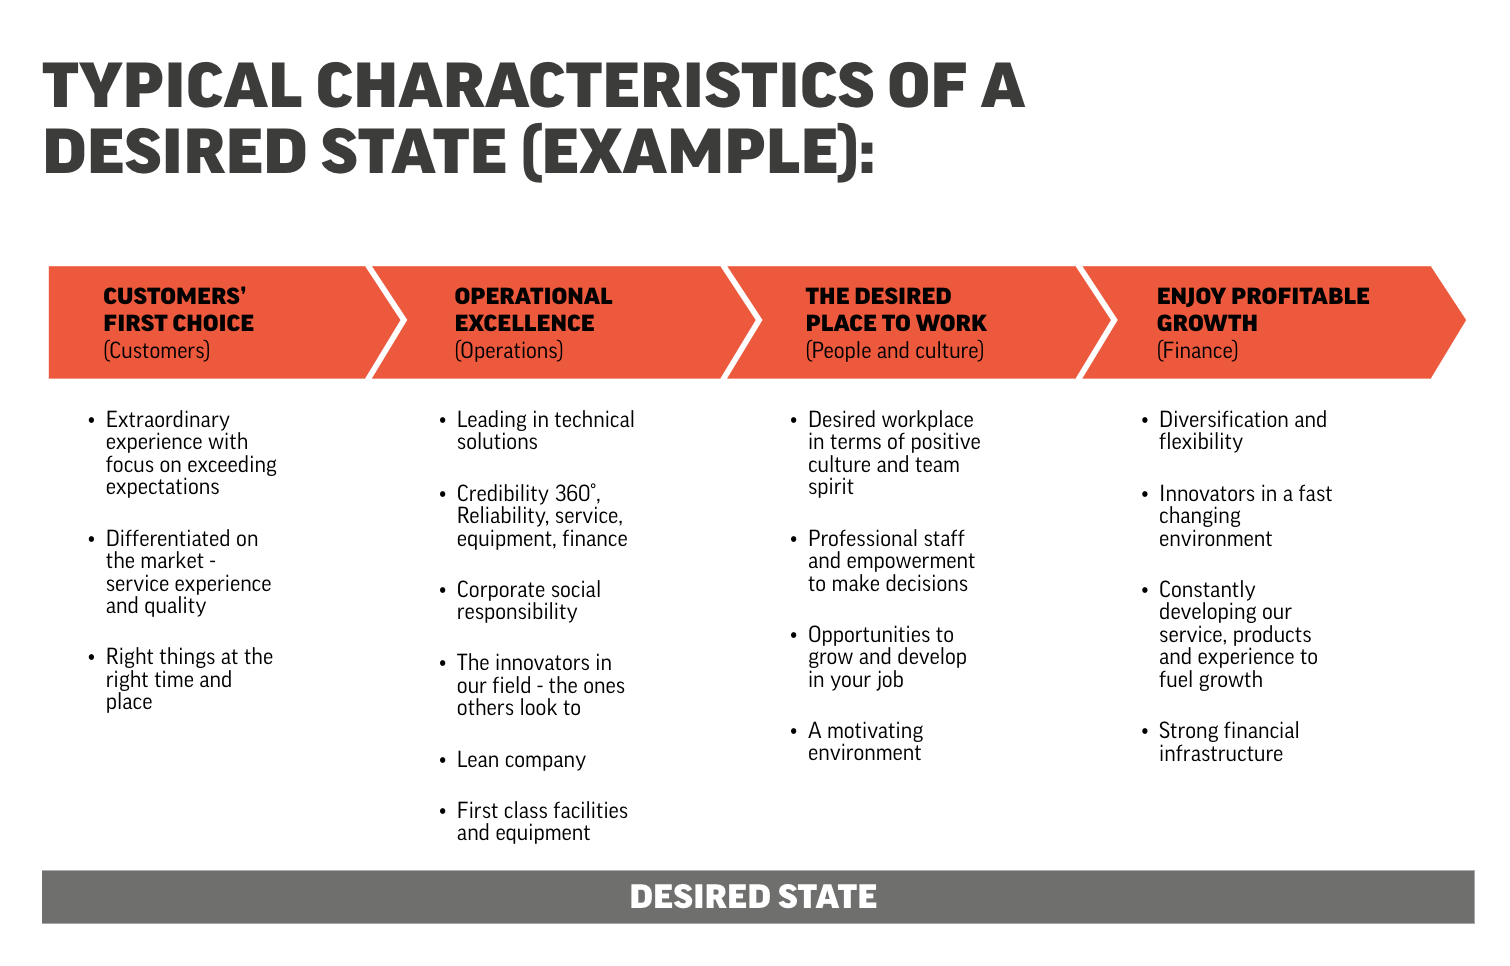 Characteristics of the Desired State